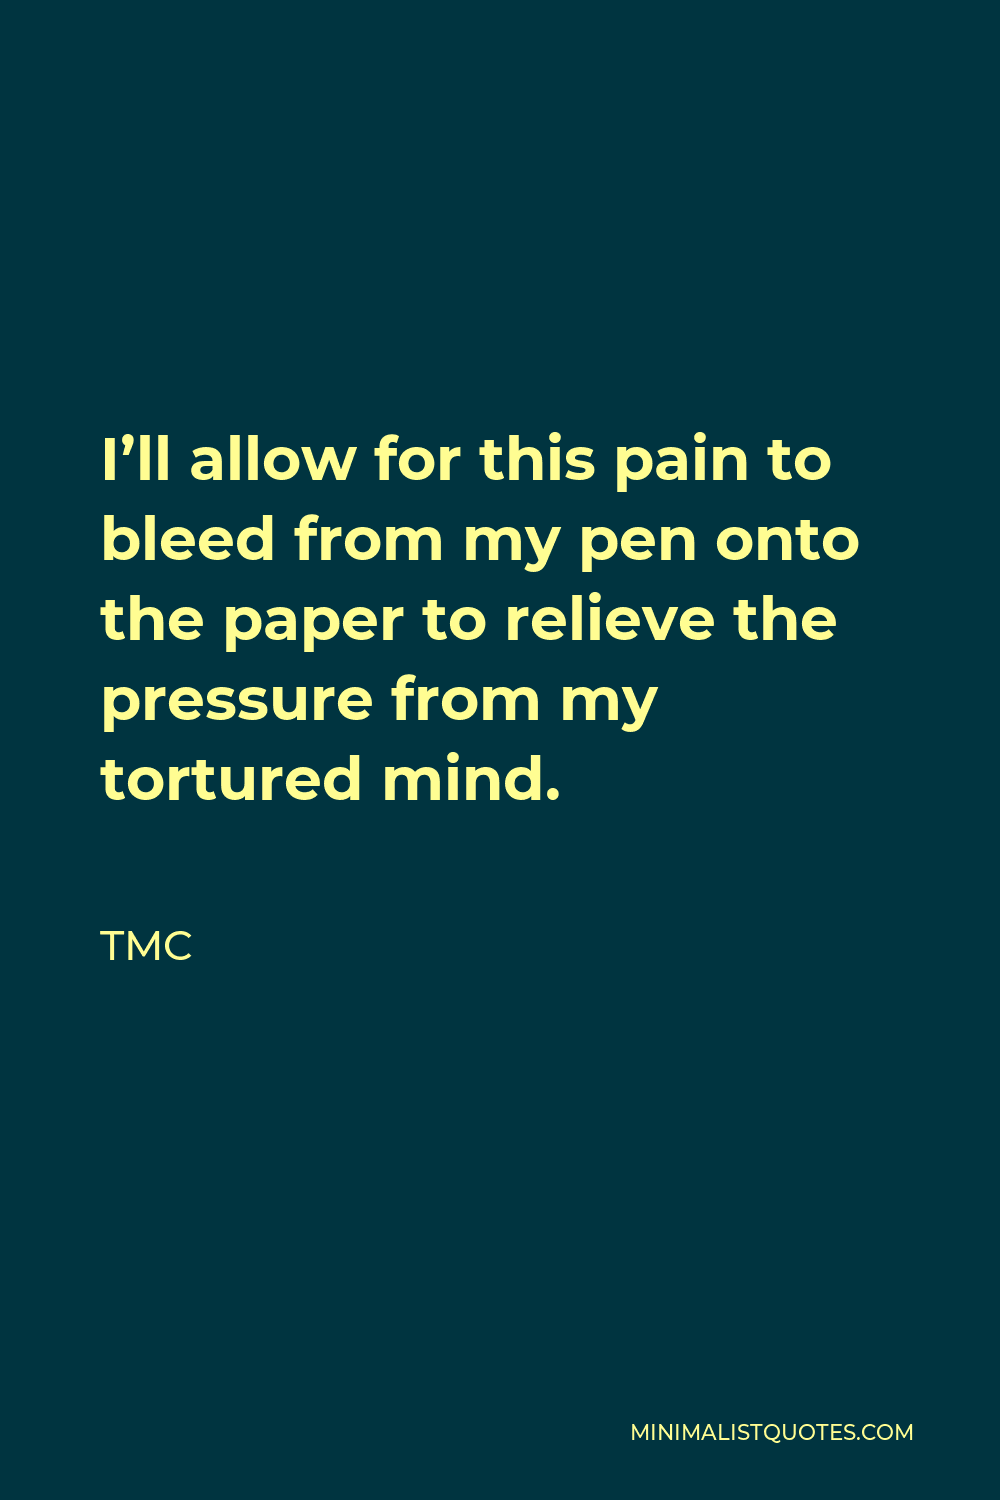 TMC Quote - I’ll allow for this pain to bleed from my pen onto the paper to relieve the pressure from my tortured mind.